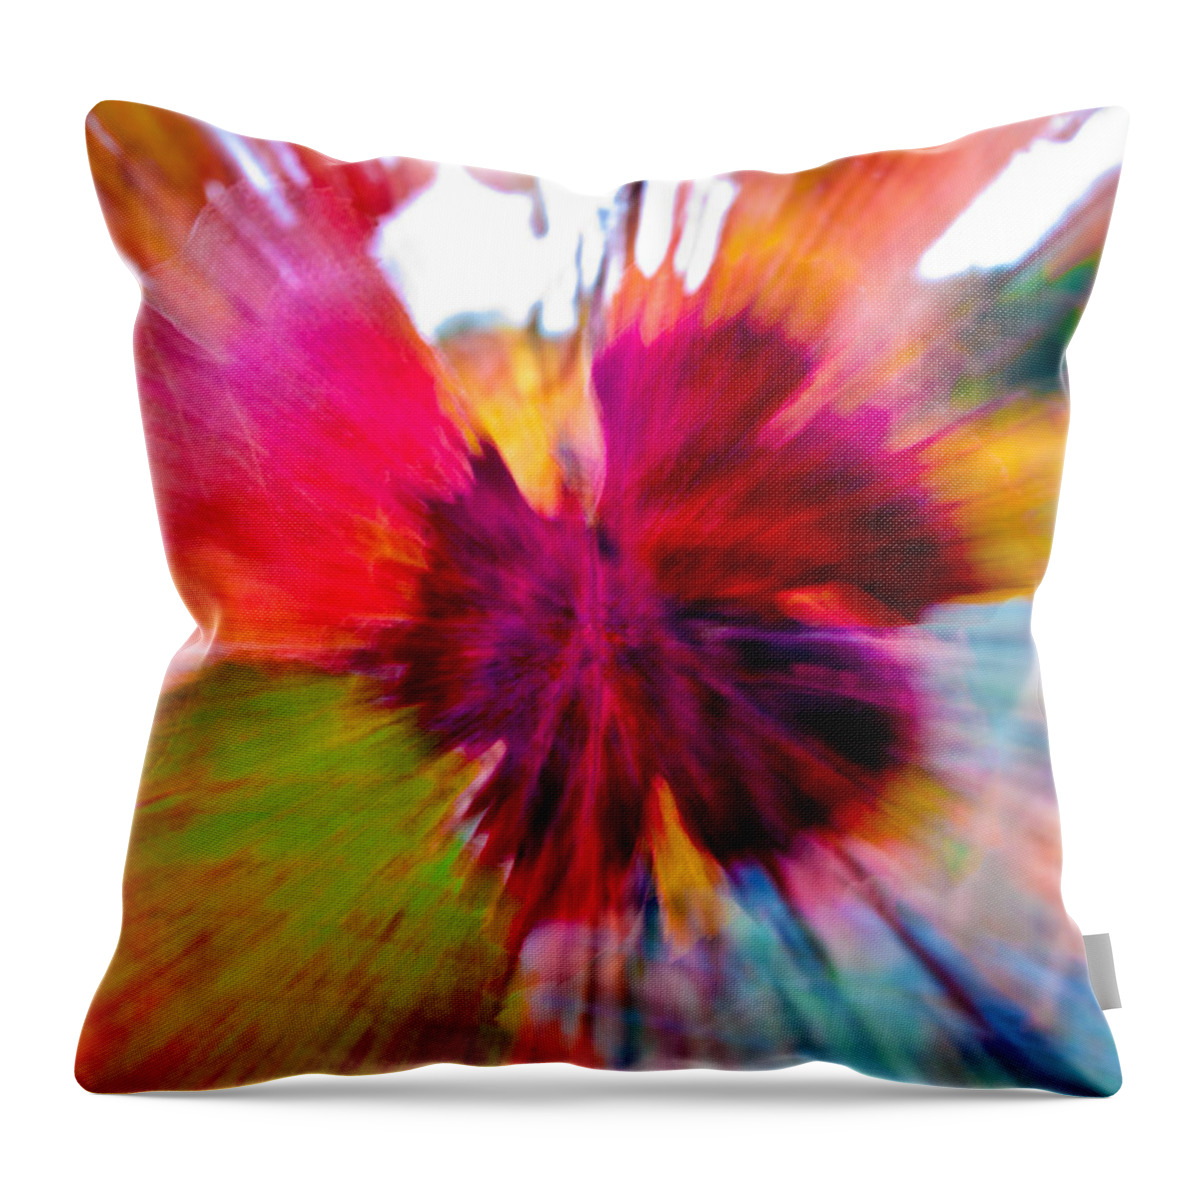 Grapevine Throw Pillow featuring the photograph Grape Vine Burst by Bill Gallagher